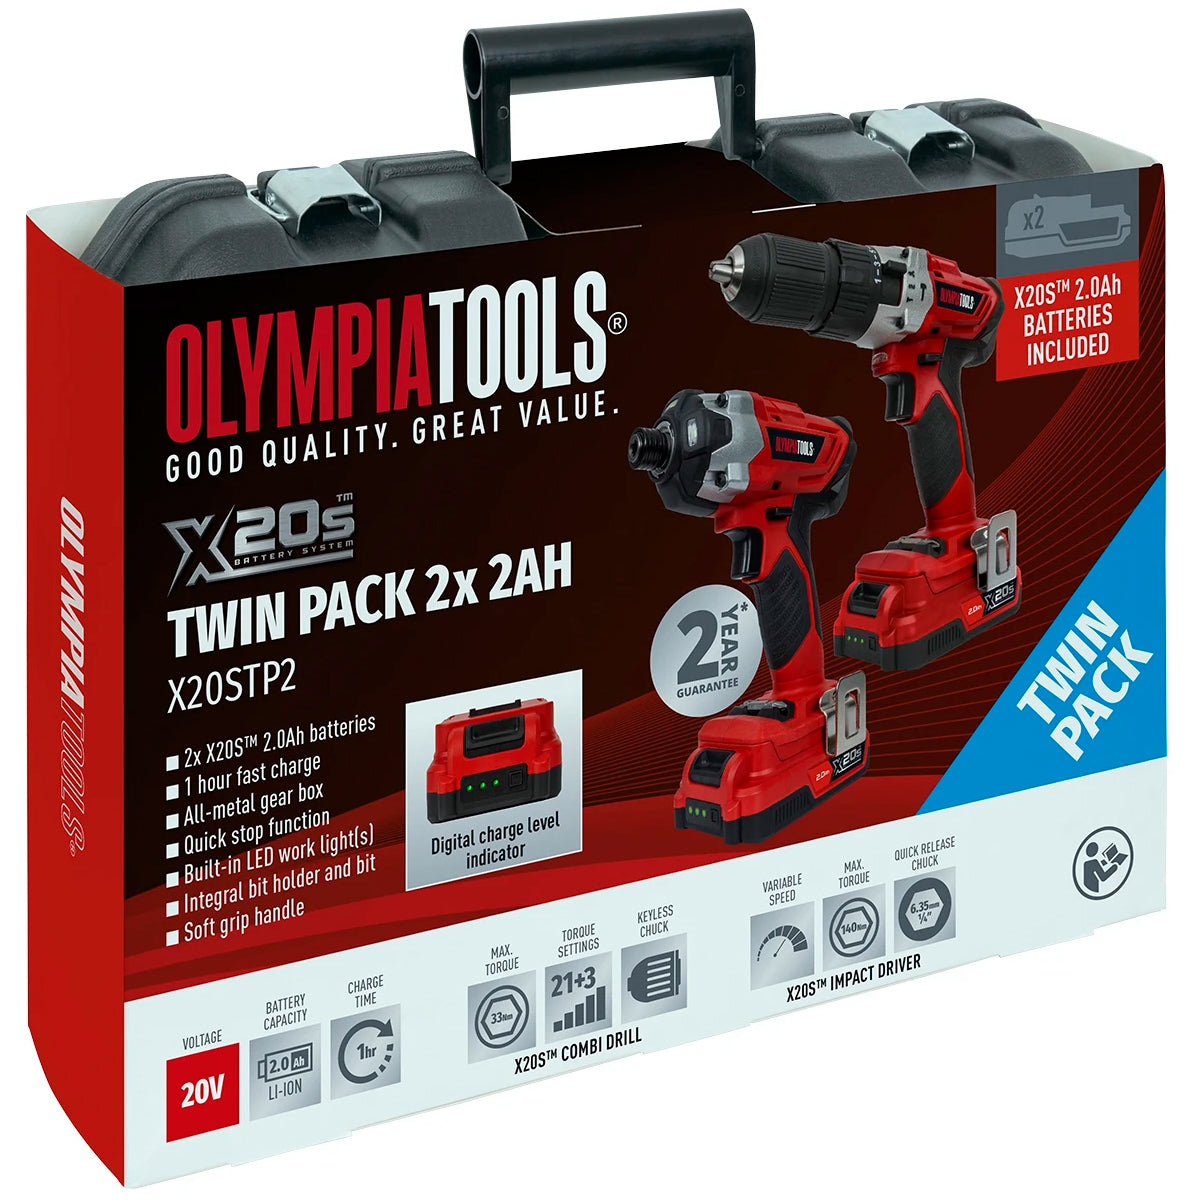 Olympia X20STP2 20V Twin Pack 2 x 2.0Ah Li-ion Battery & Charger in Case